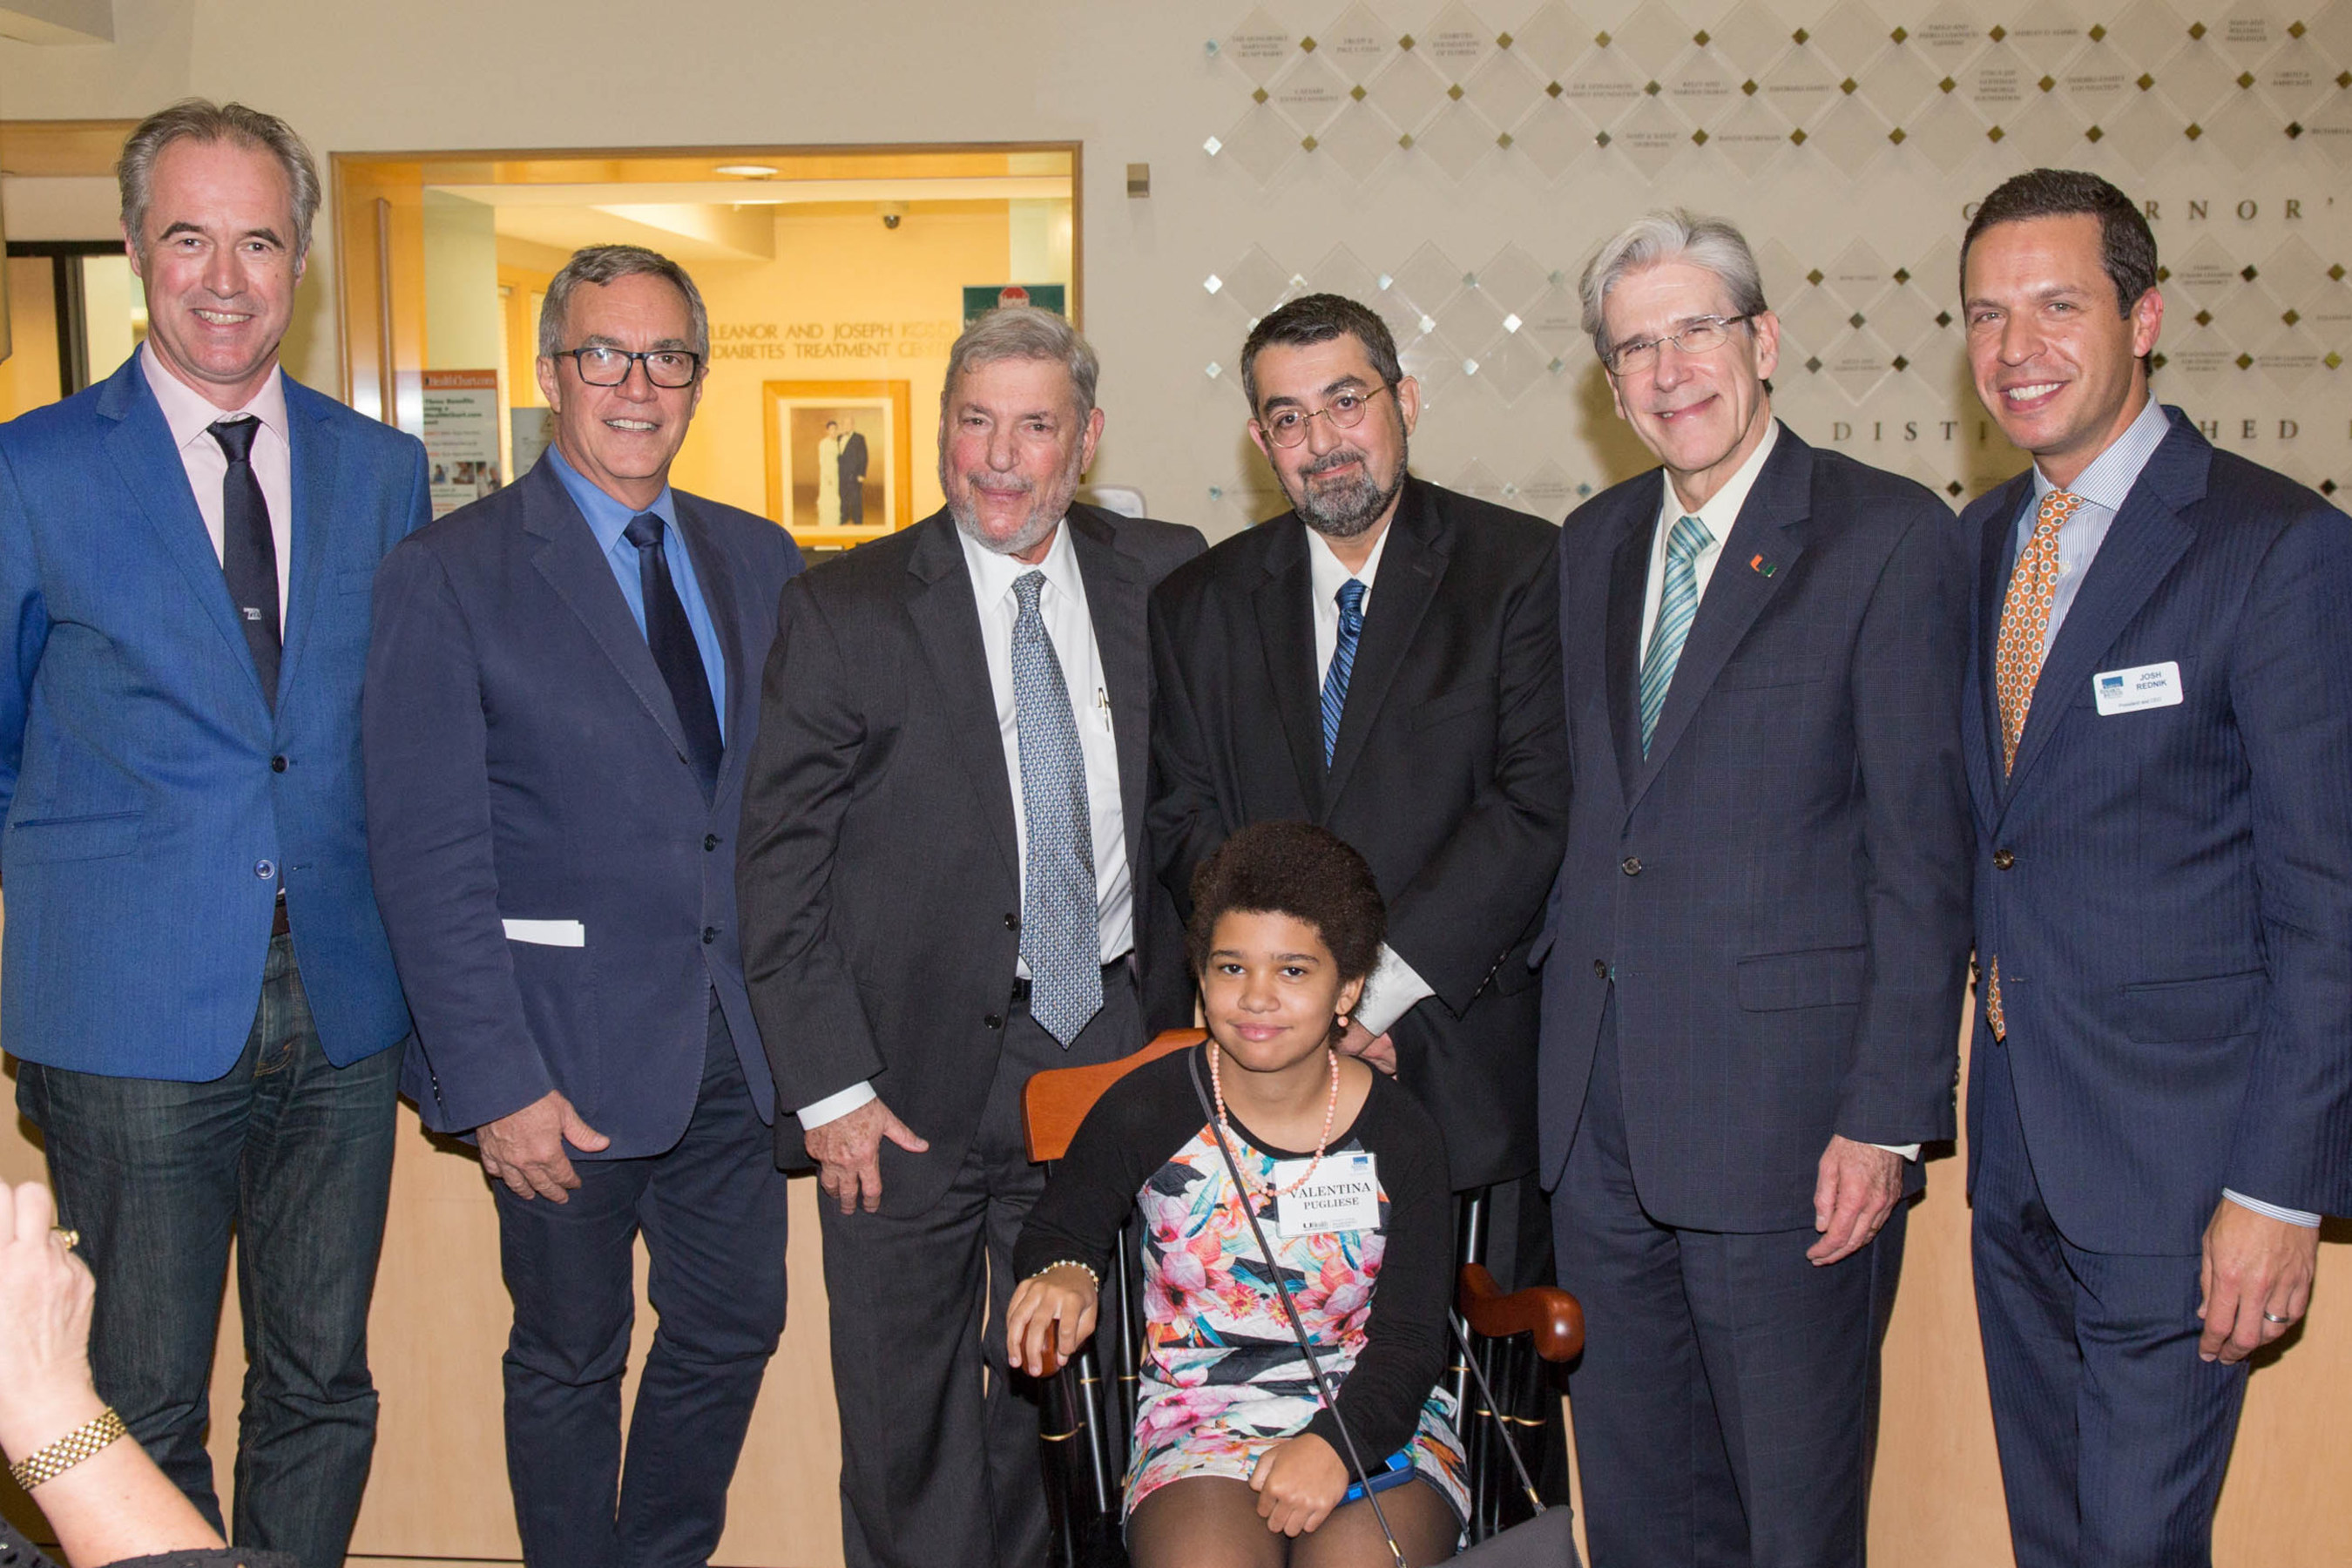 At the ceremony for the presentation of the J. Enloe and Eugenia J. Dodson Chair in Diabetes Research, speakers, including Bart Roep, M.D., Ph.D., Camillo Ricordi, M.D., Laurence B. Gardner, M.D., MACP, Alberto Pugliese, M.D., President Julio Frenk, and Joshua Rednik, pause for a photo, while Valentina Pugliese tries out her father's chair.